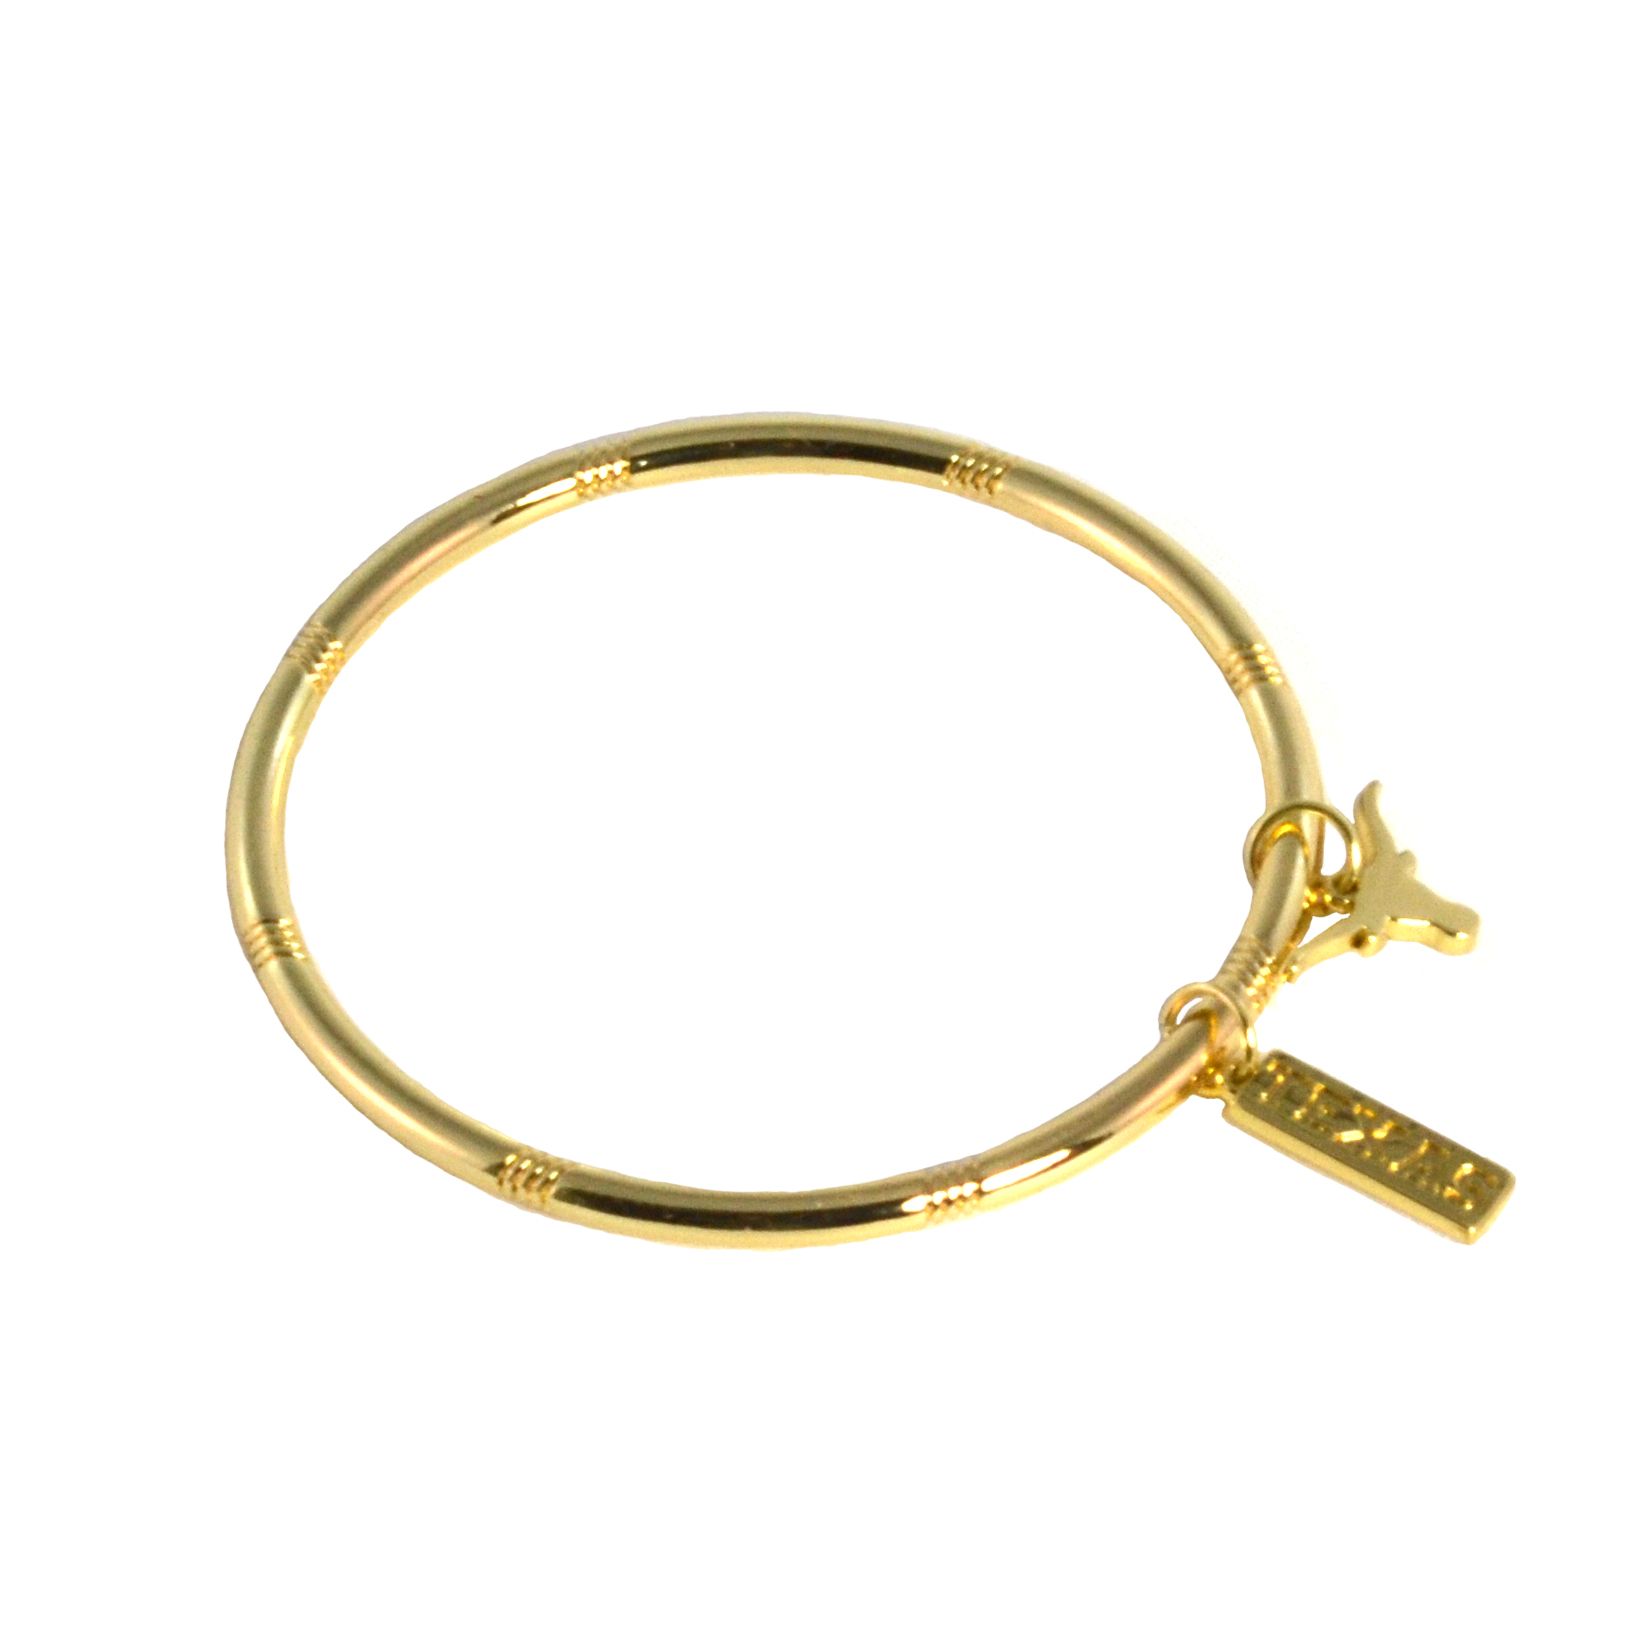 gold bracelet with charm